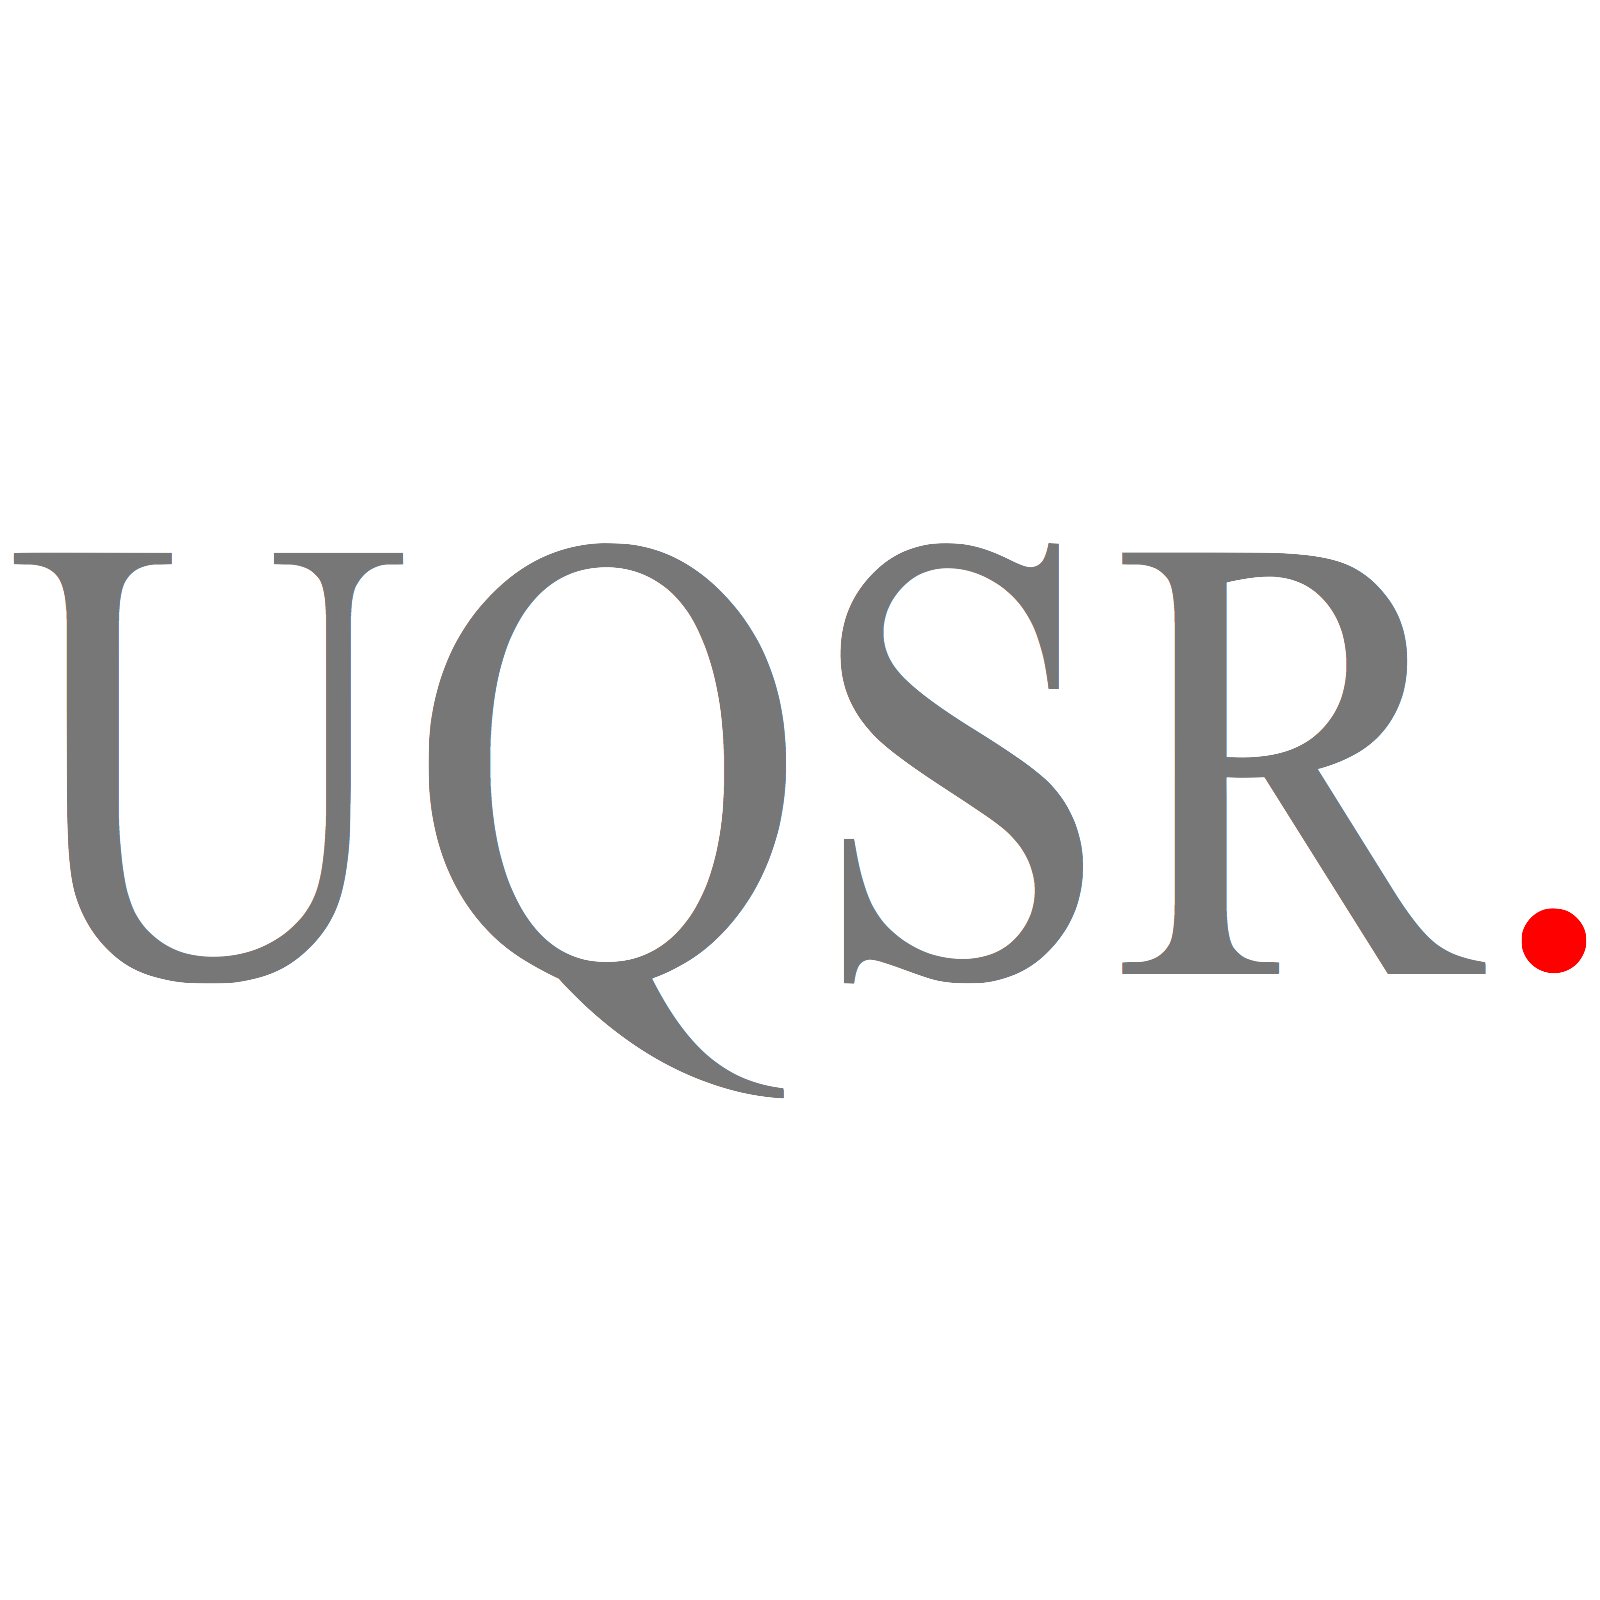 UQSR in an independent certification body operating worldwide. We are an accredited ISO certification registrar for various management system standards.